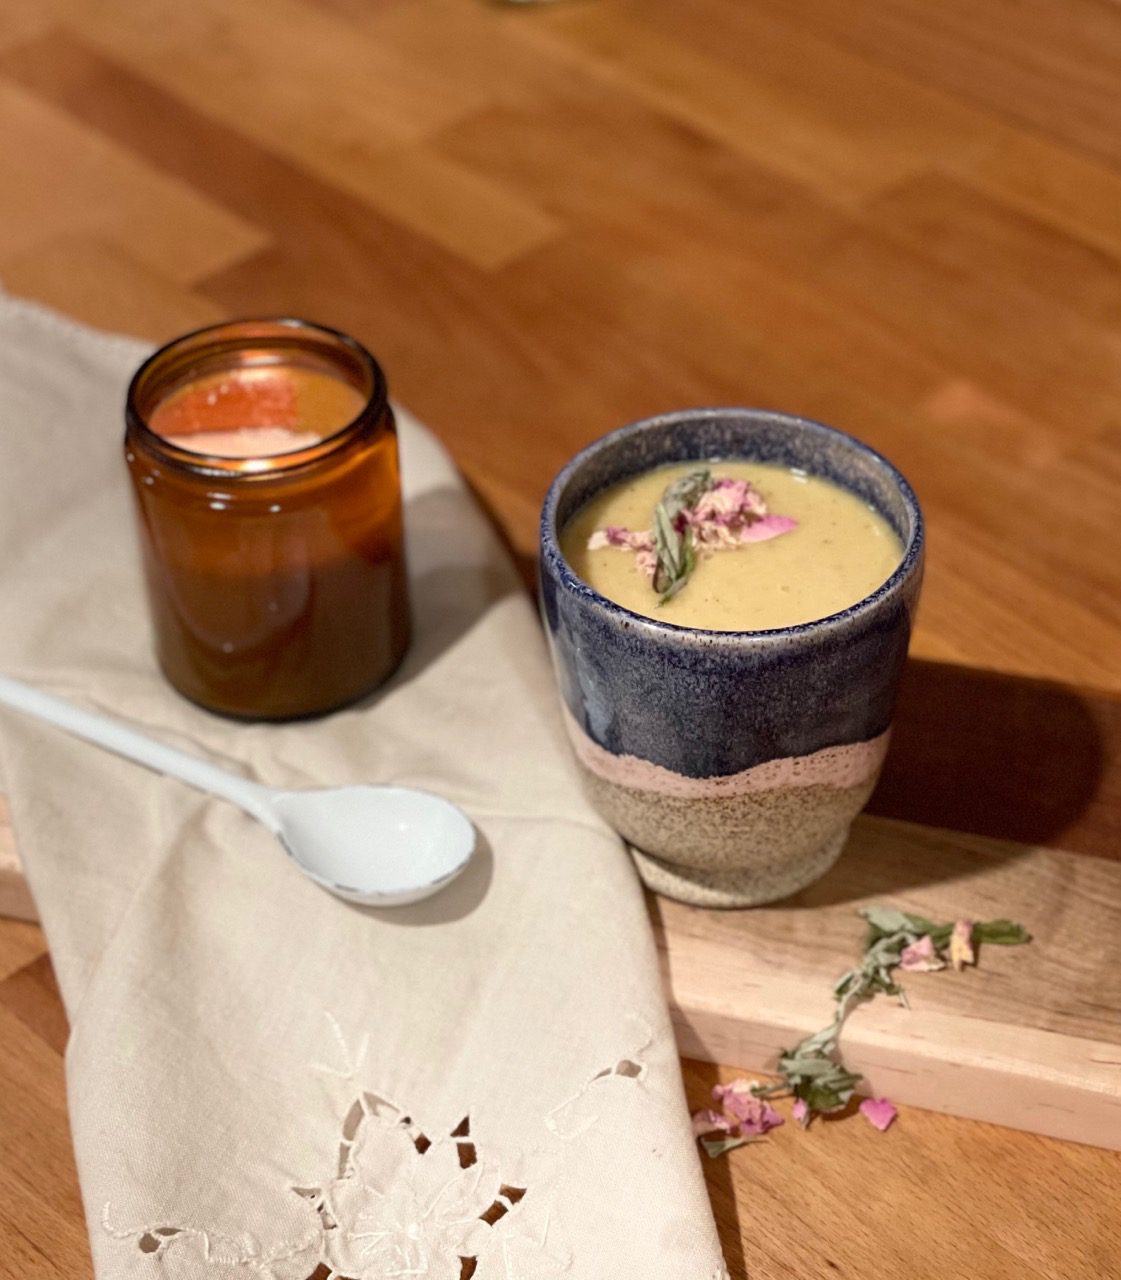 Handmade ceramic cup with mango mugwort mushroom milk adorned with dried rose petals and mugwort leaves, surrounded by cottage things: a warm wooden cutting board draped with an embroidered napkin, a lit candle in a warm amber jar, and scattered dried herbs